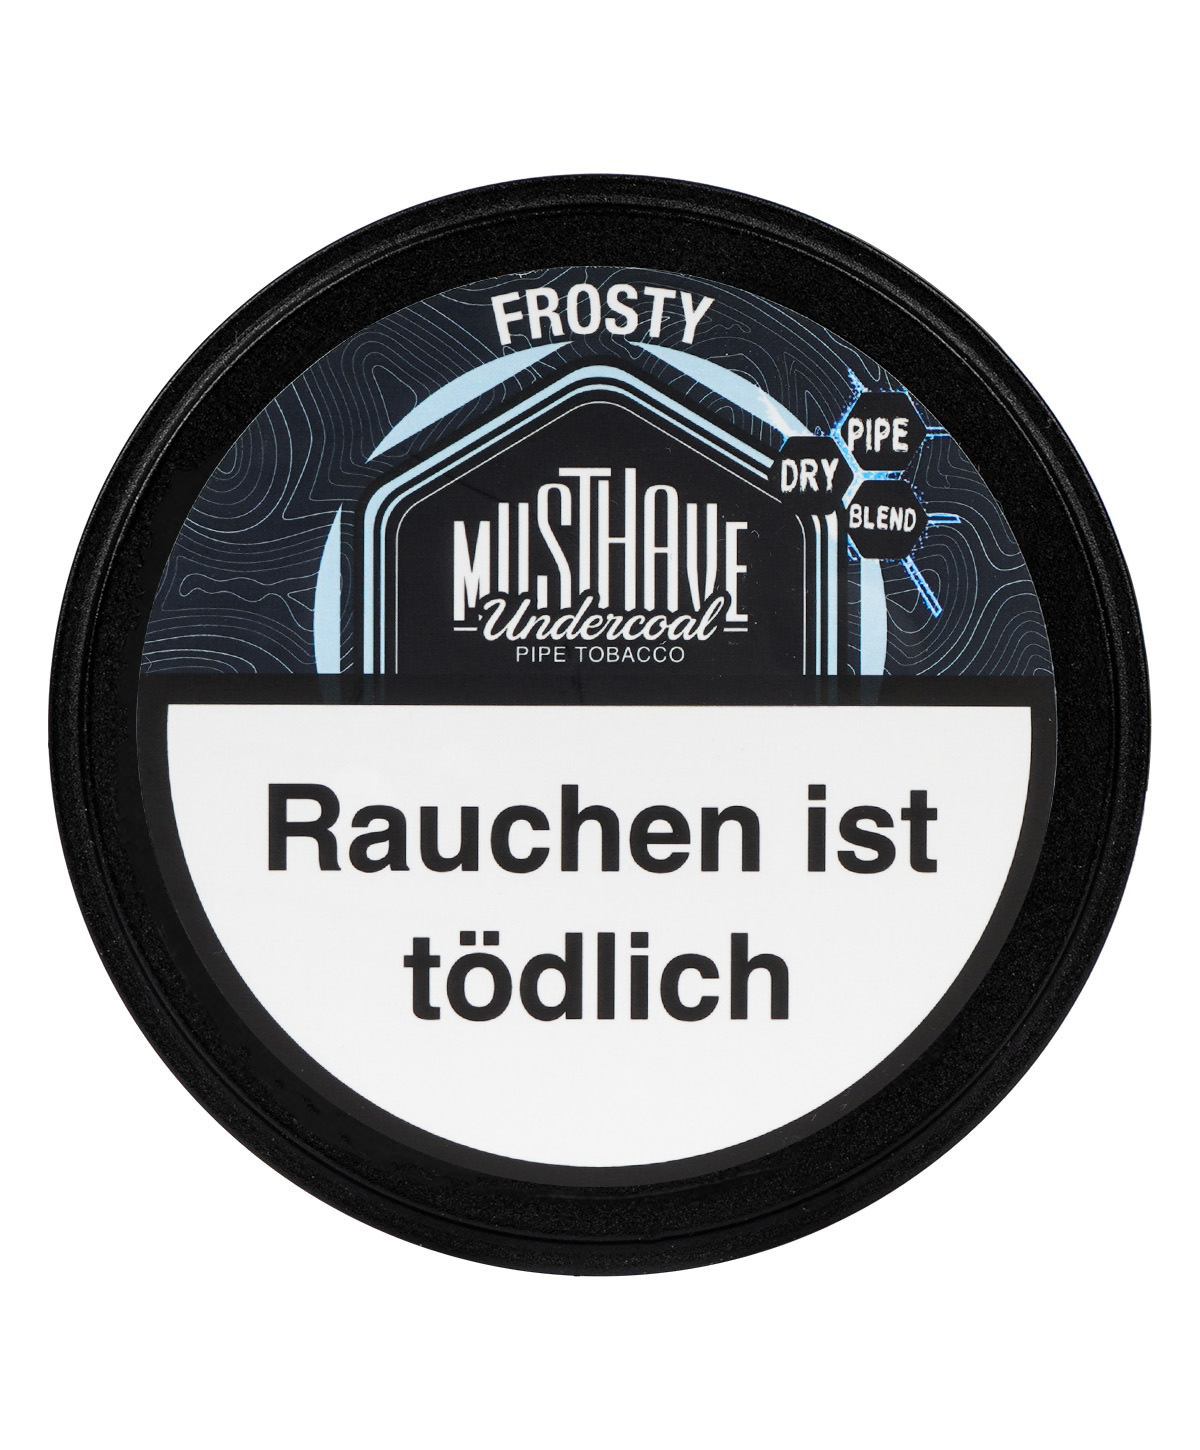 Musthave Frosty Dry Base 70g